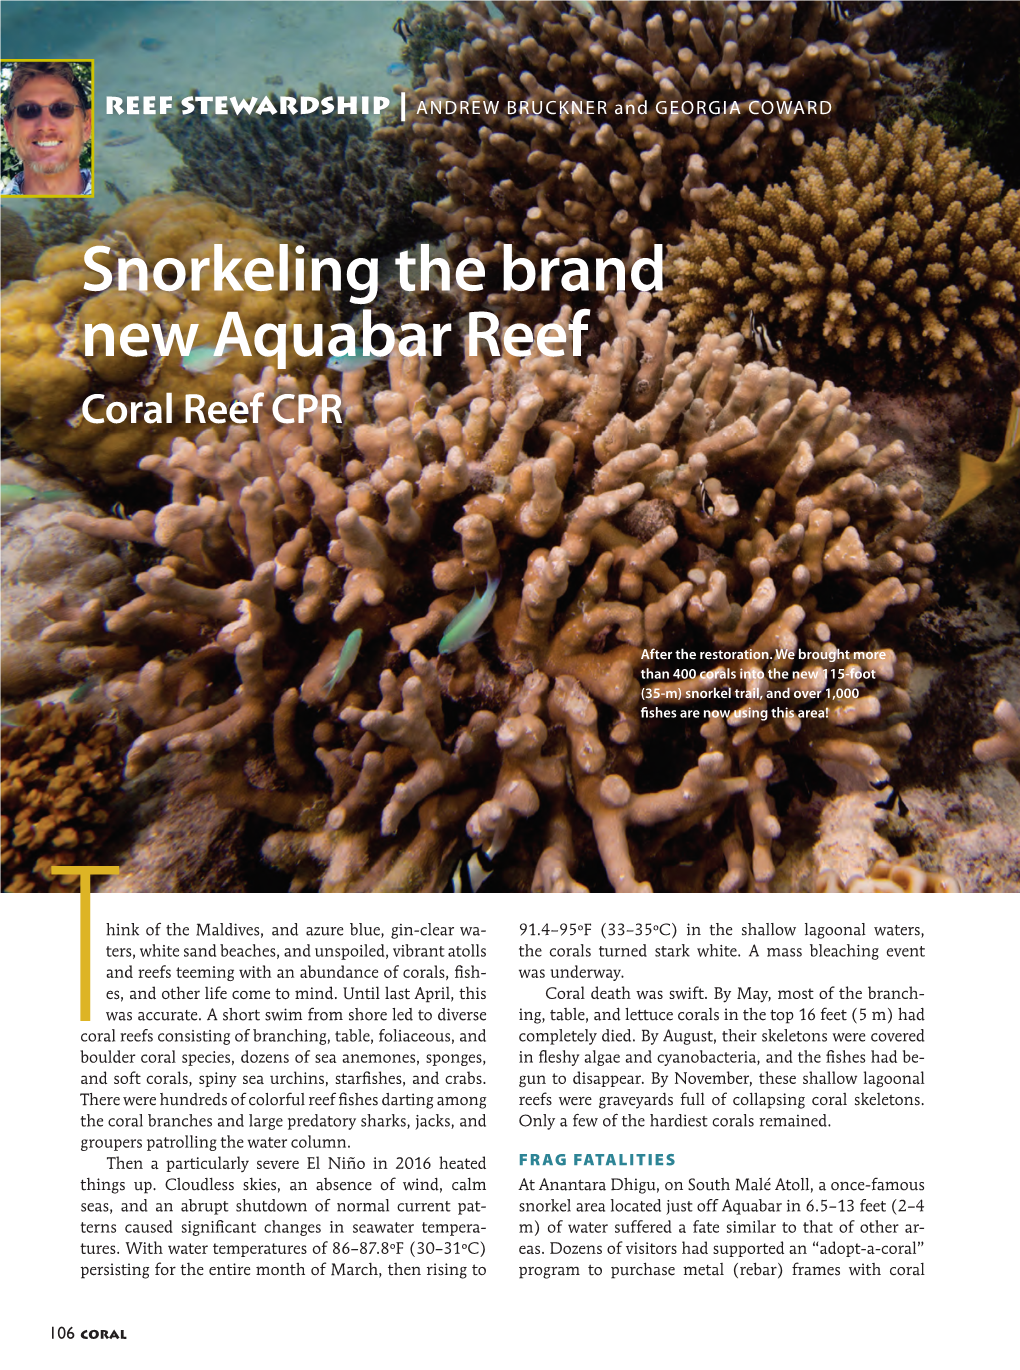 Snorkeling the Brand New Aquabar Reef Coral Reef CPR